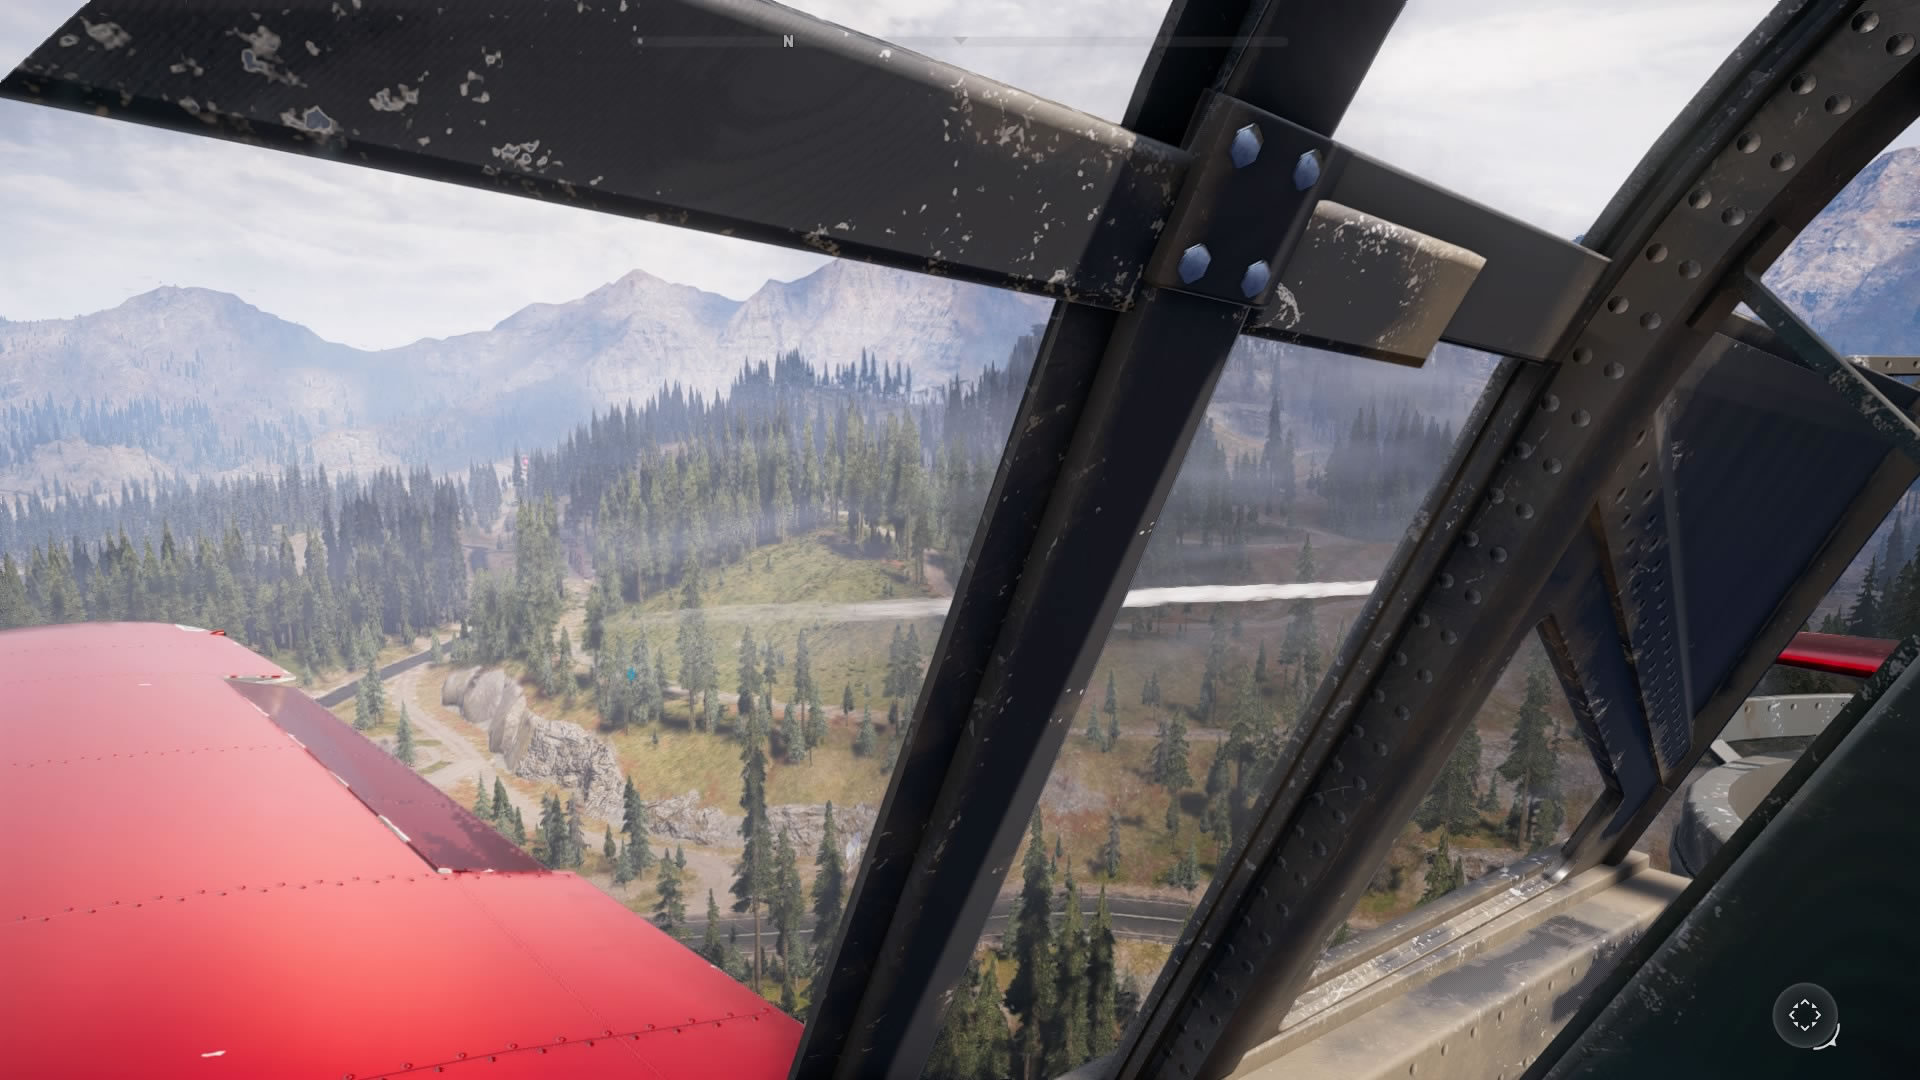 Parent's Guide: Far Cry 5 | Age rating, mature content and difficulty | Outcyders